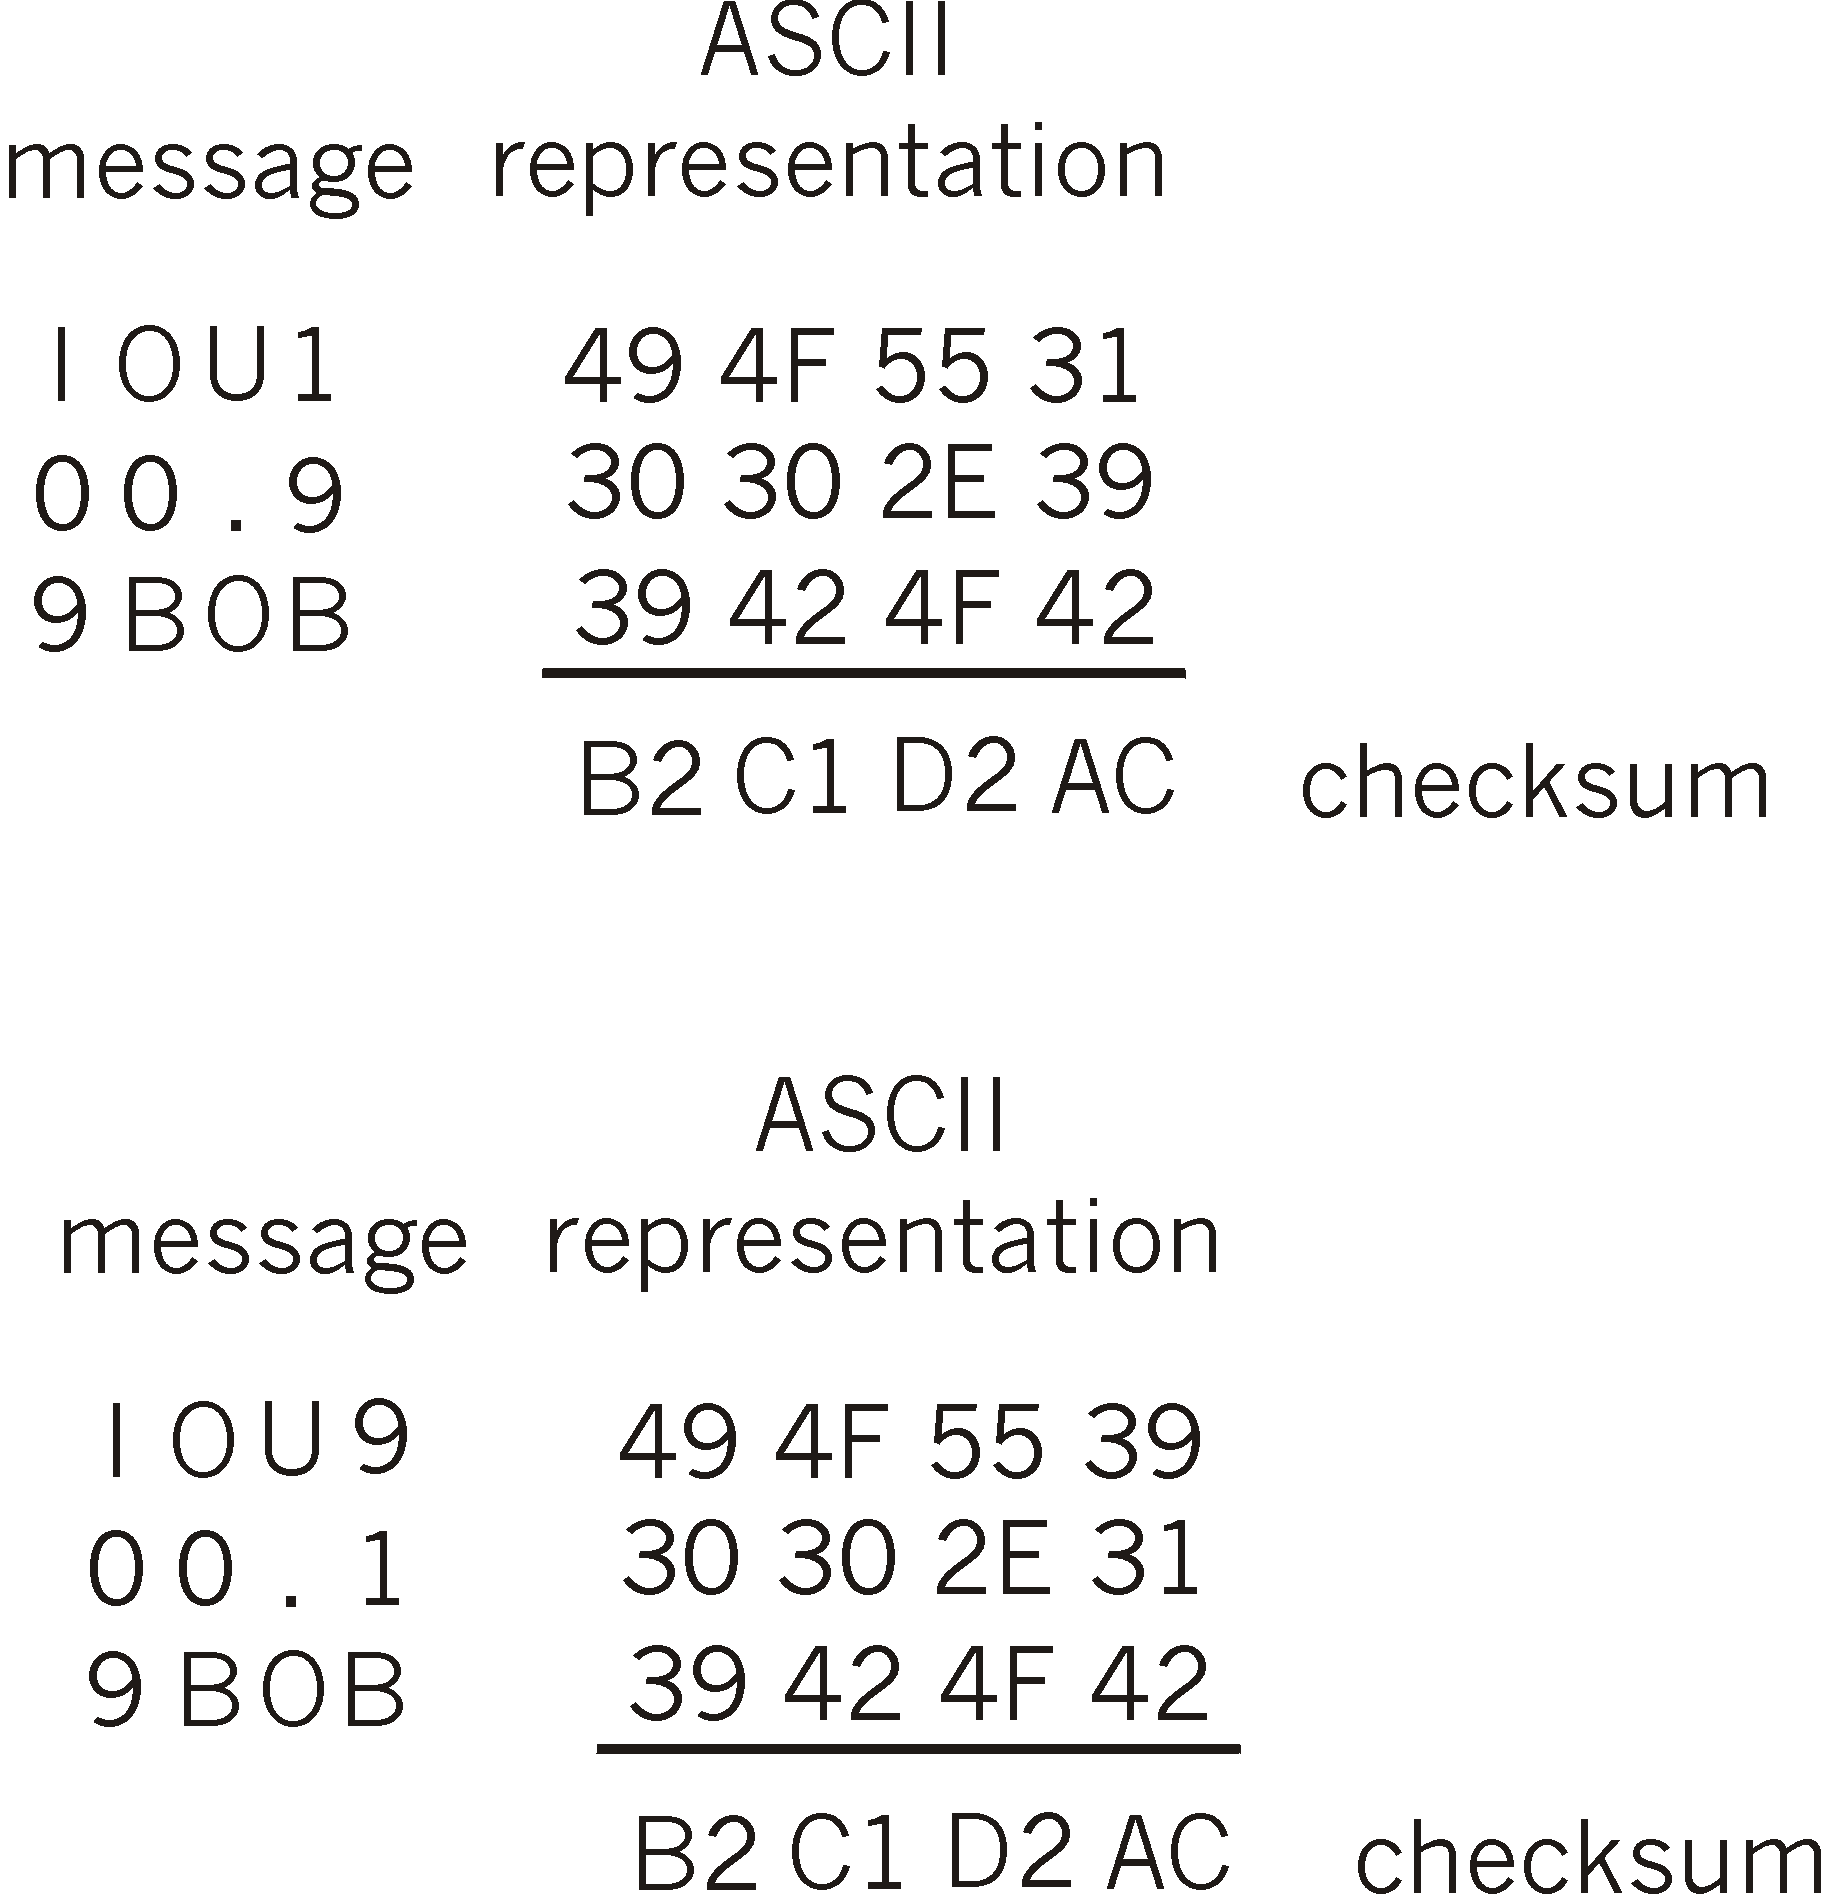 Two messages with same checksum